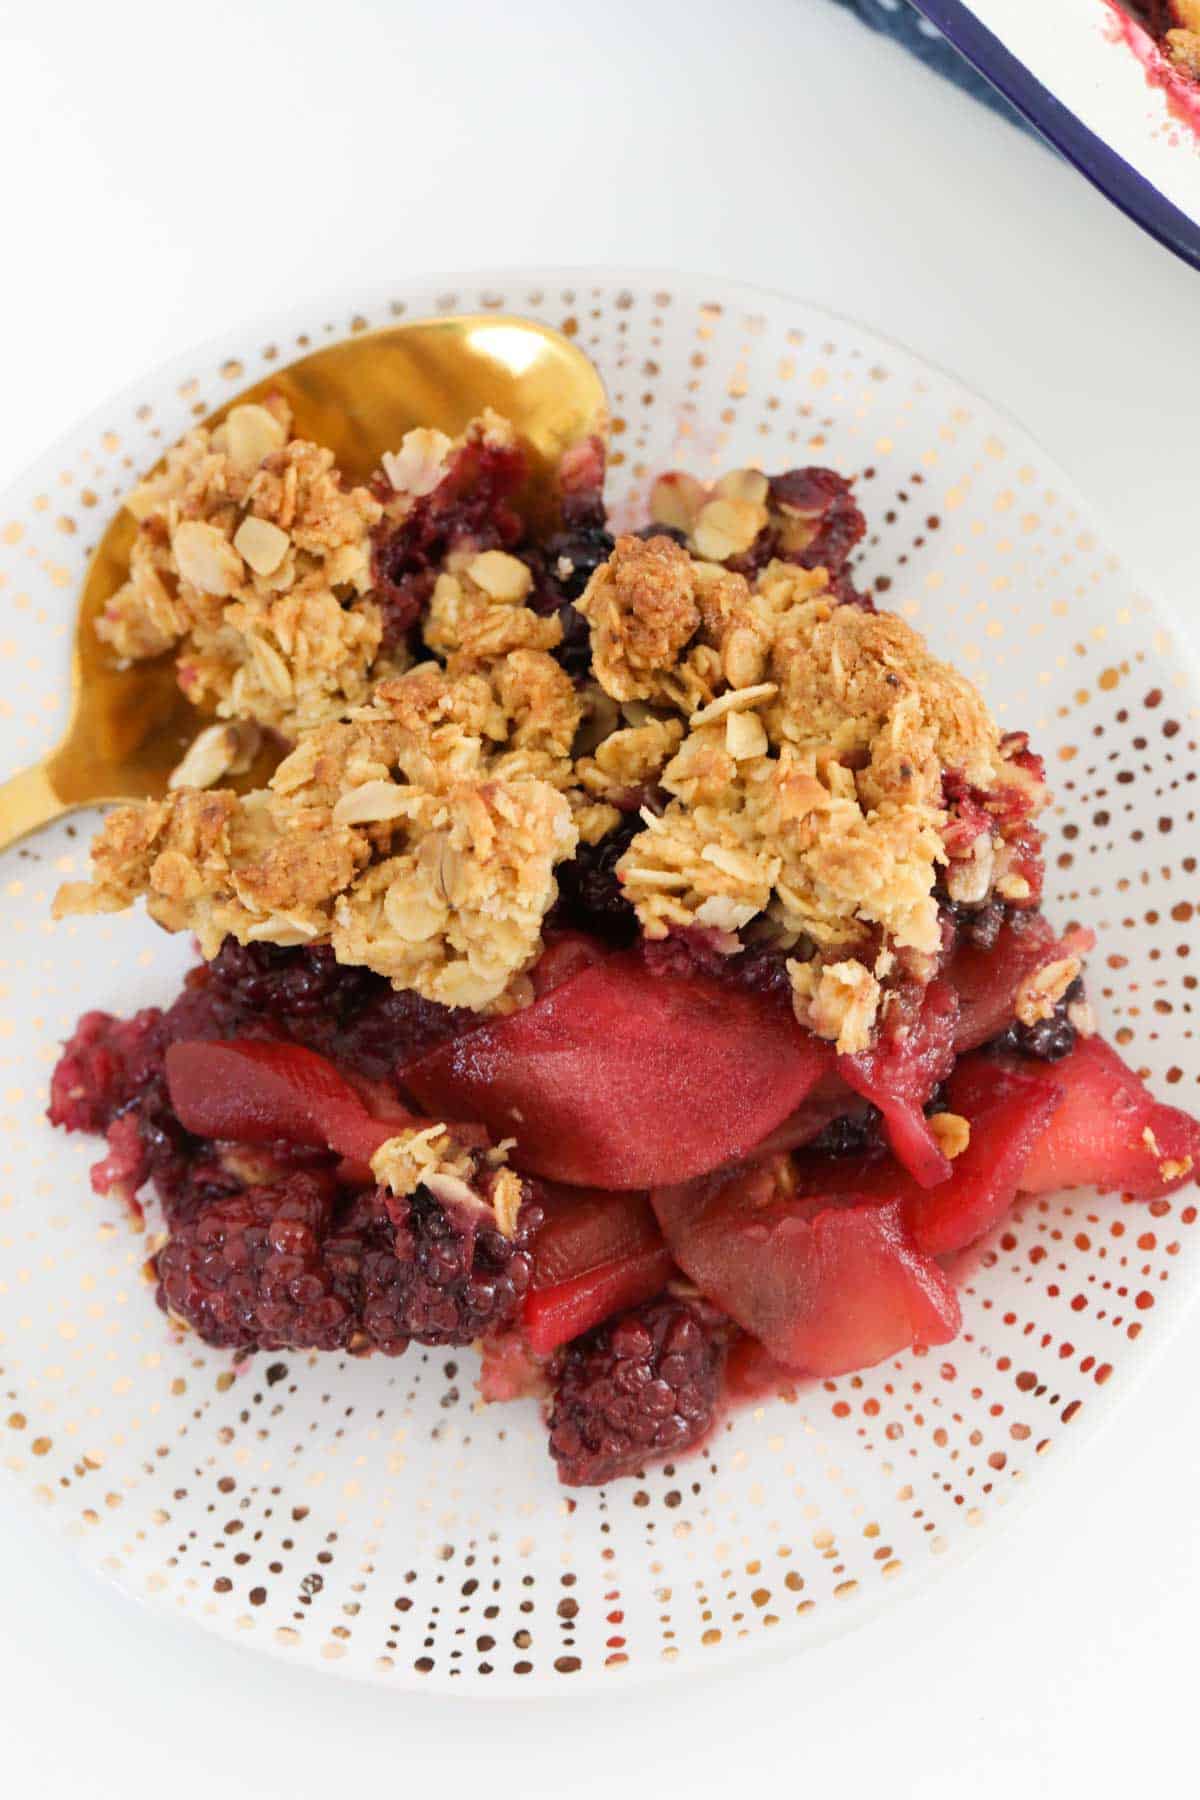 A plate of crunchy apple crisp with blackberries.